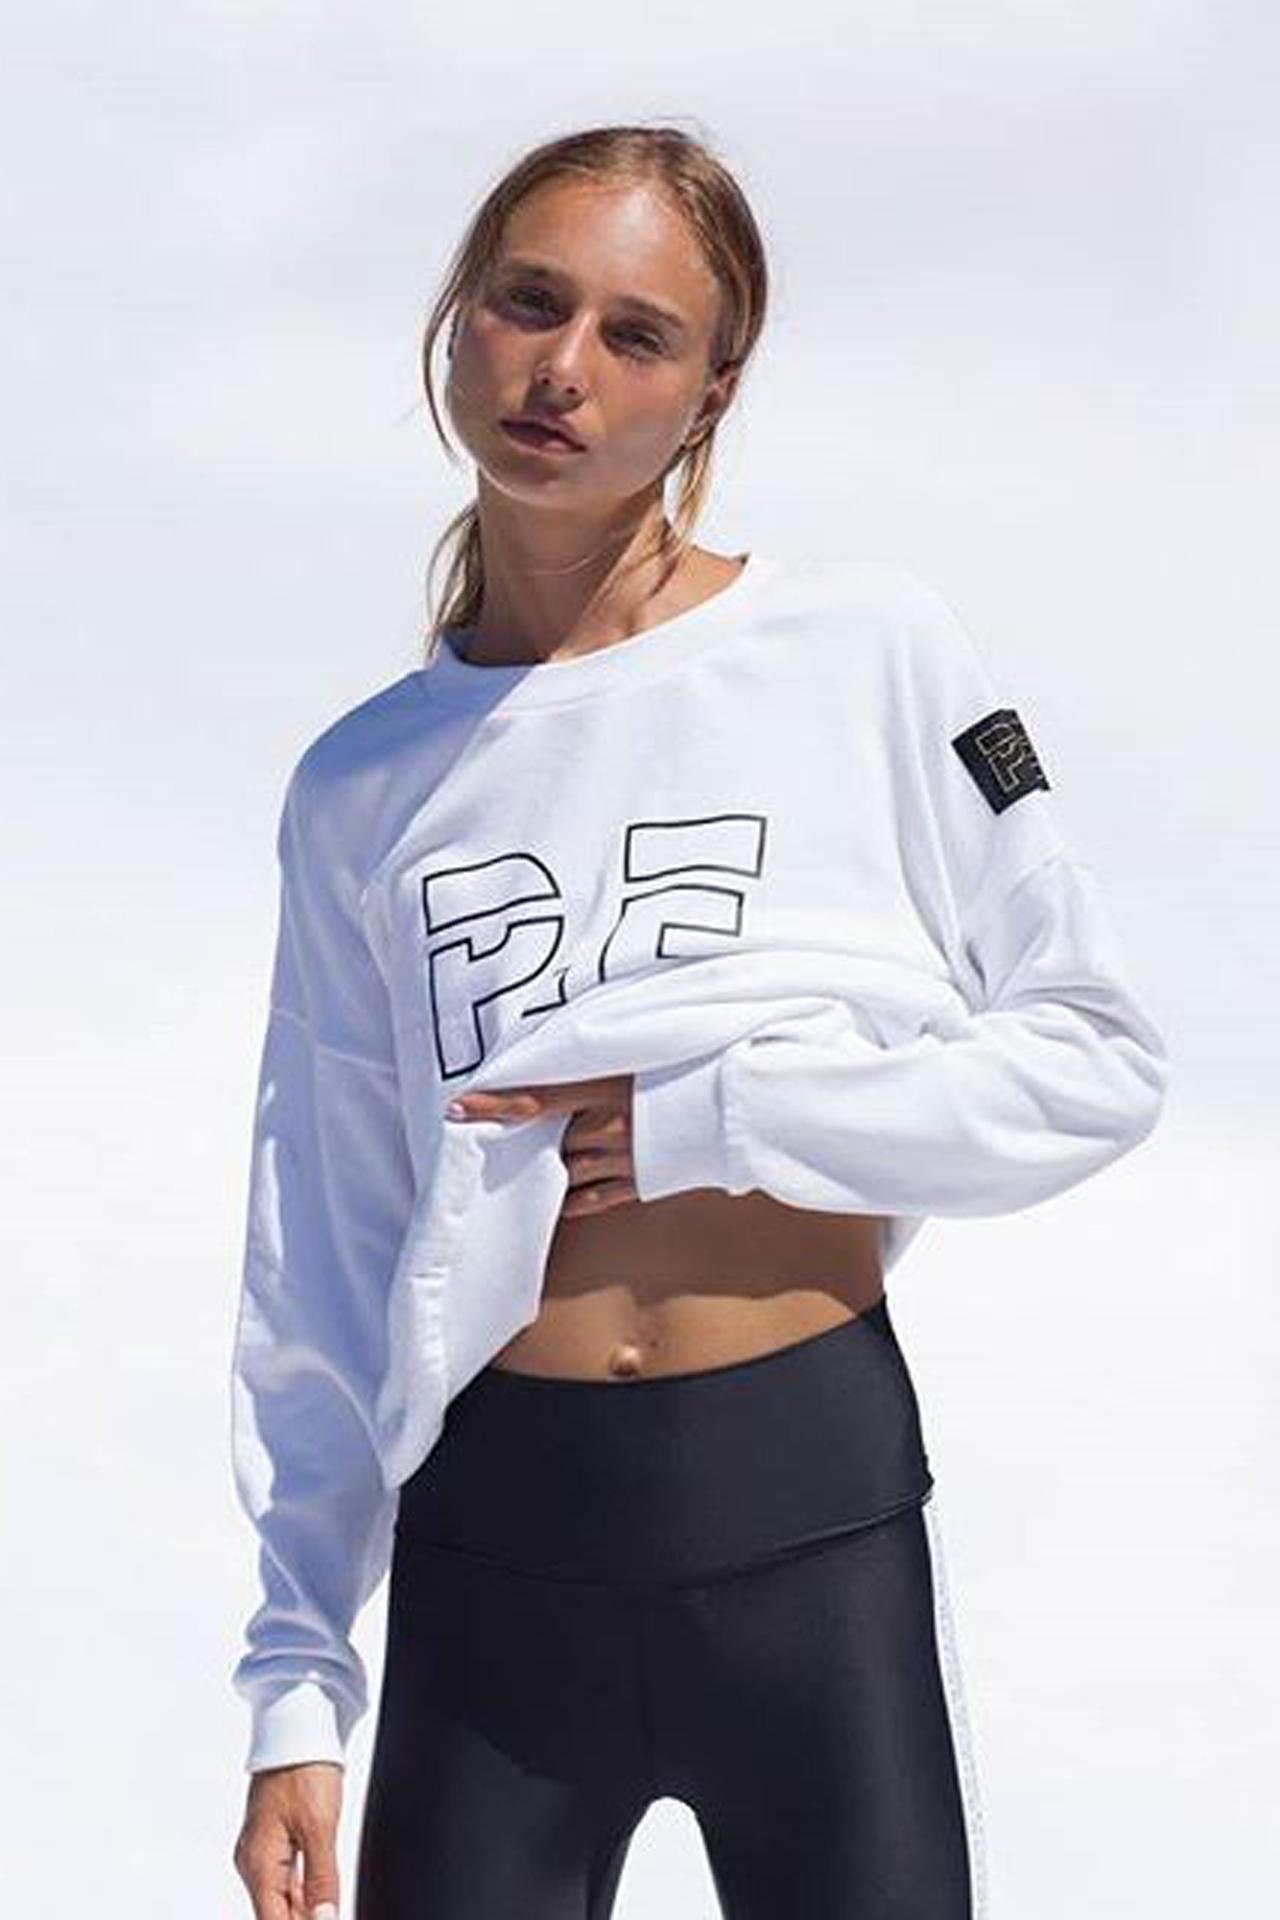 Athleisurewear trend: founders of activewear brand P.E. Nation on how to  perfect the look - Vogue Australia